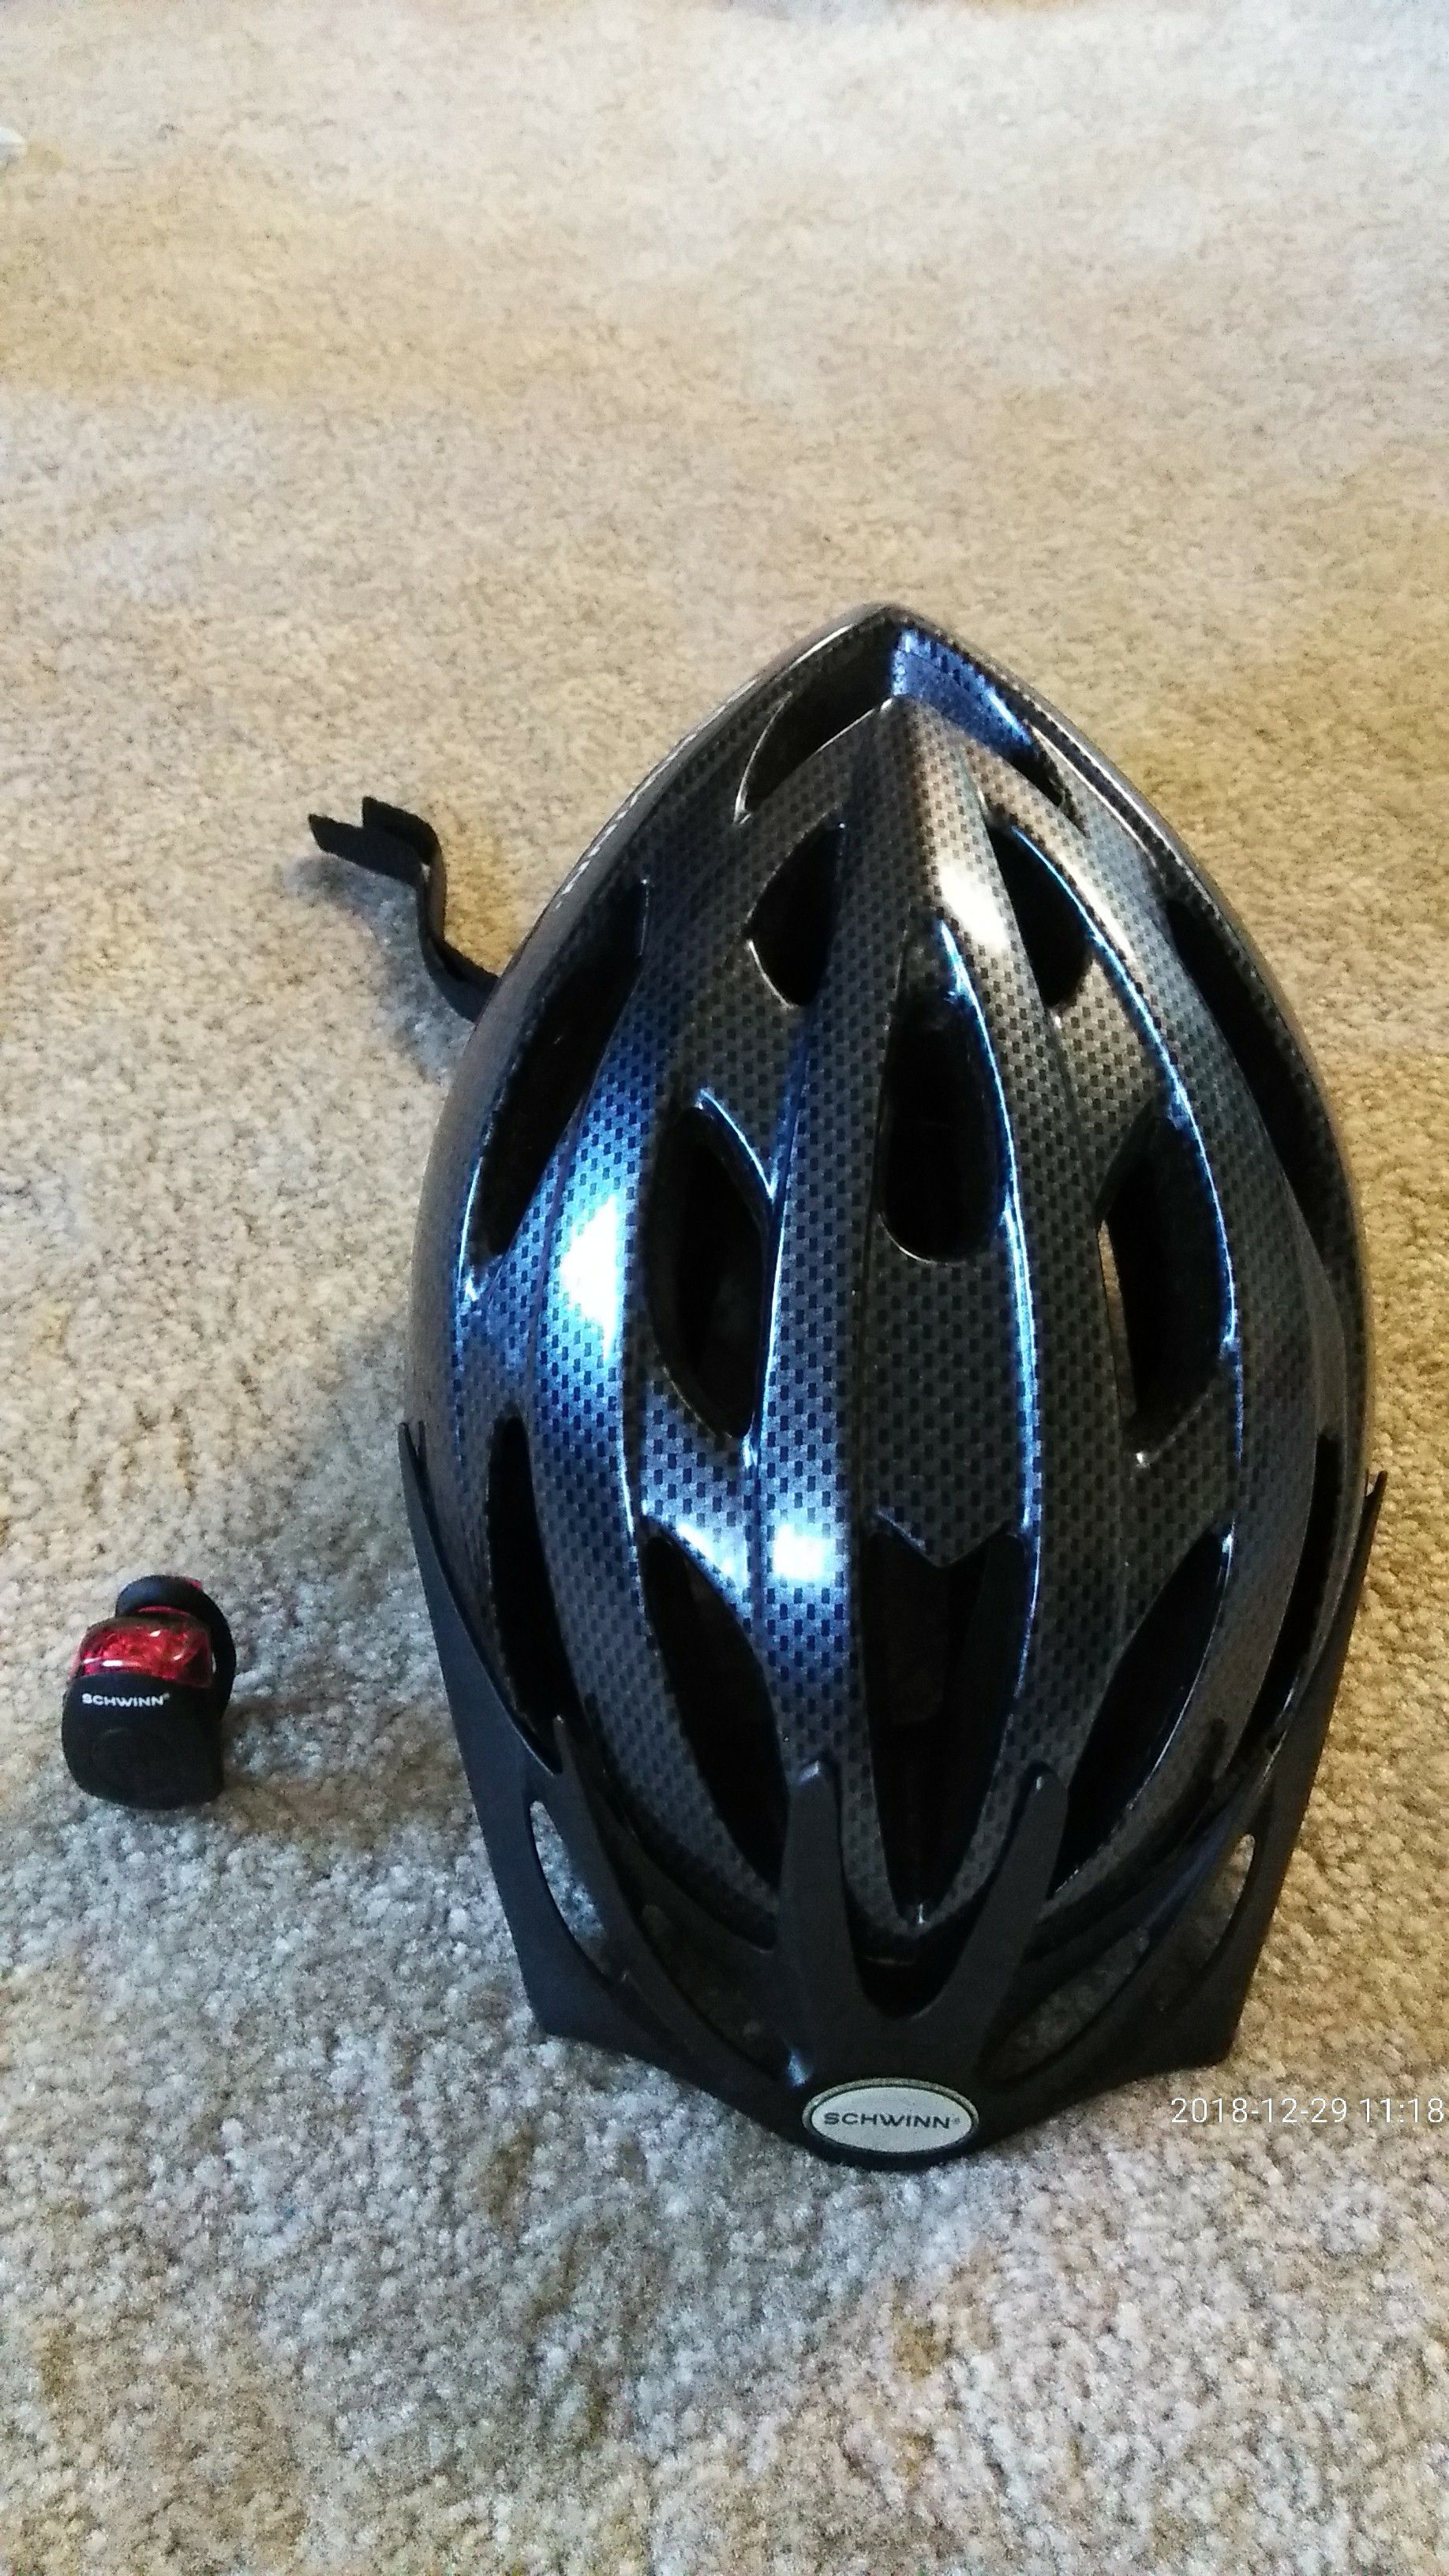 Helmet and tag light from SCHWINN (need it gone as soon as possible) price negotiable